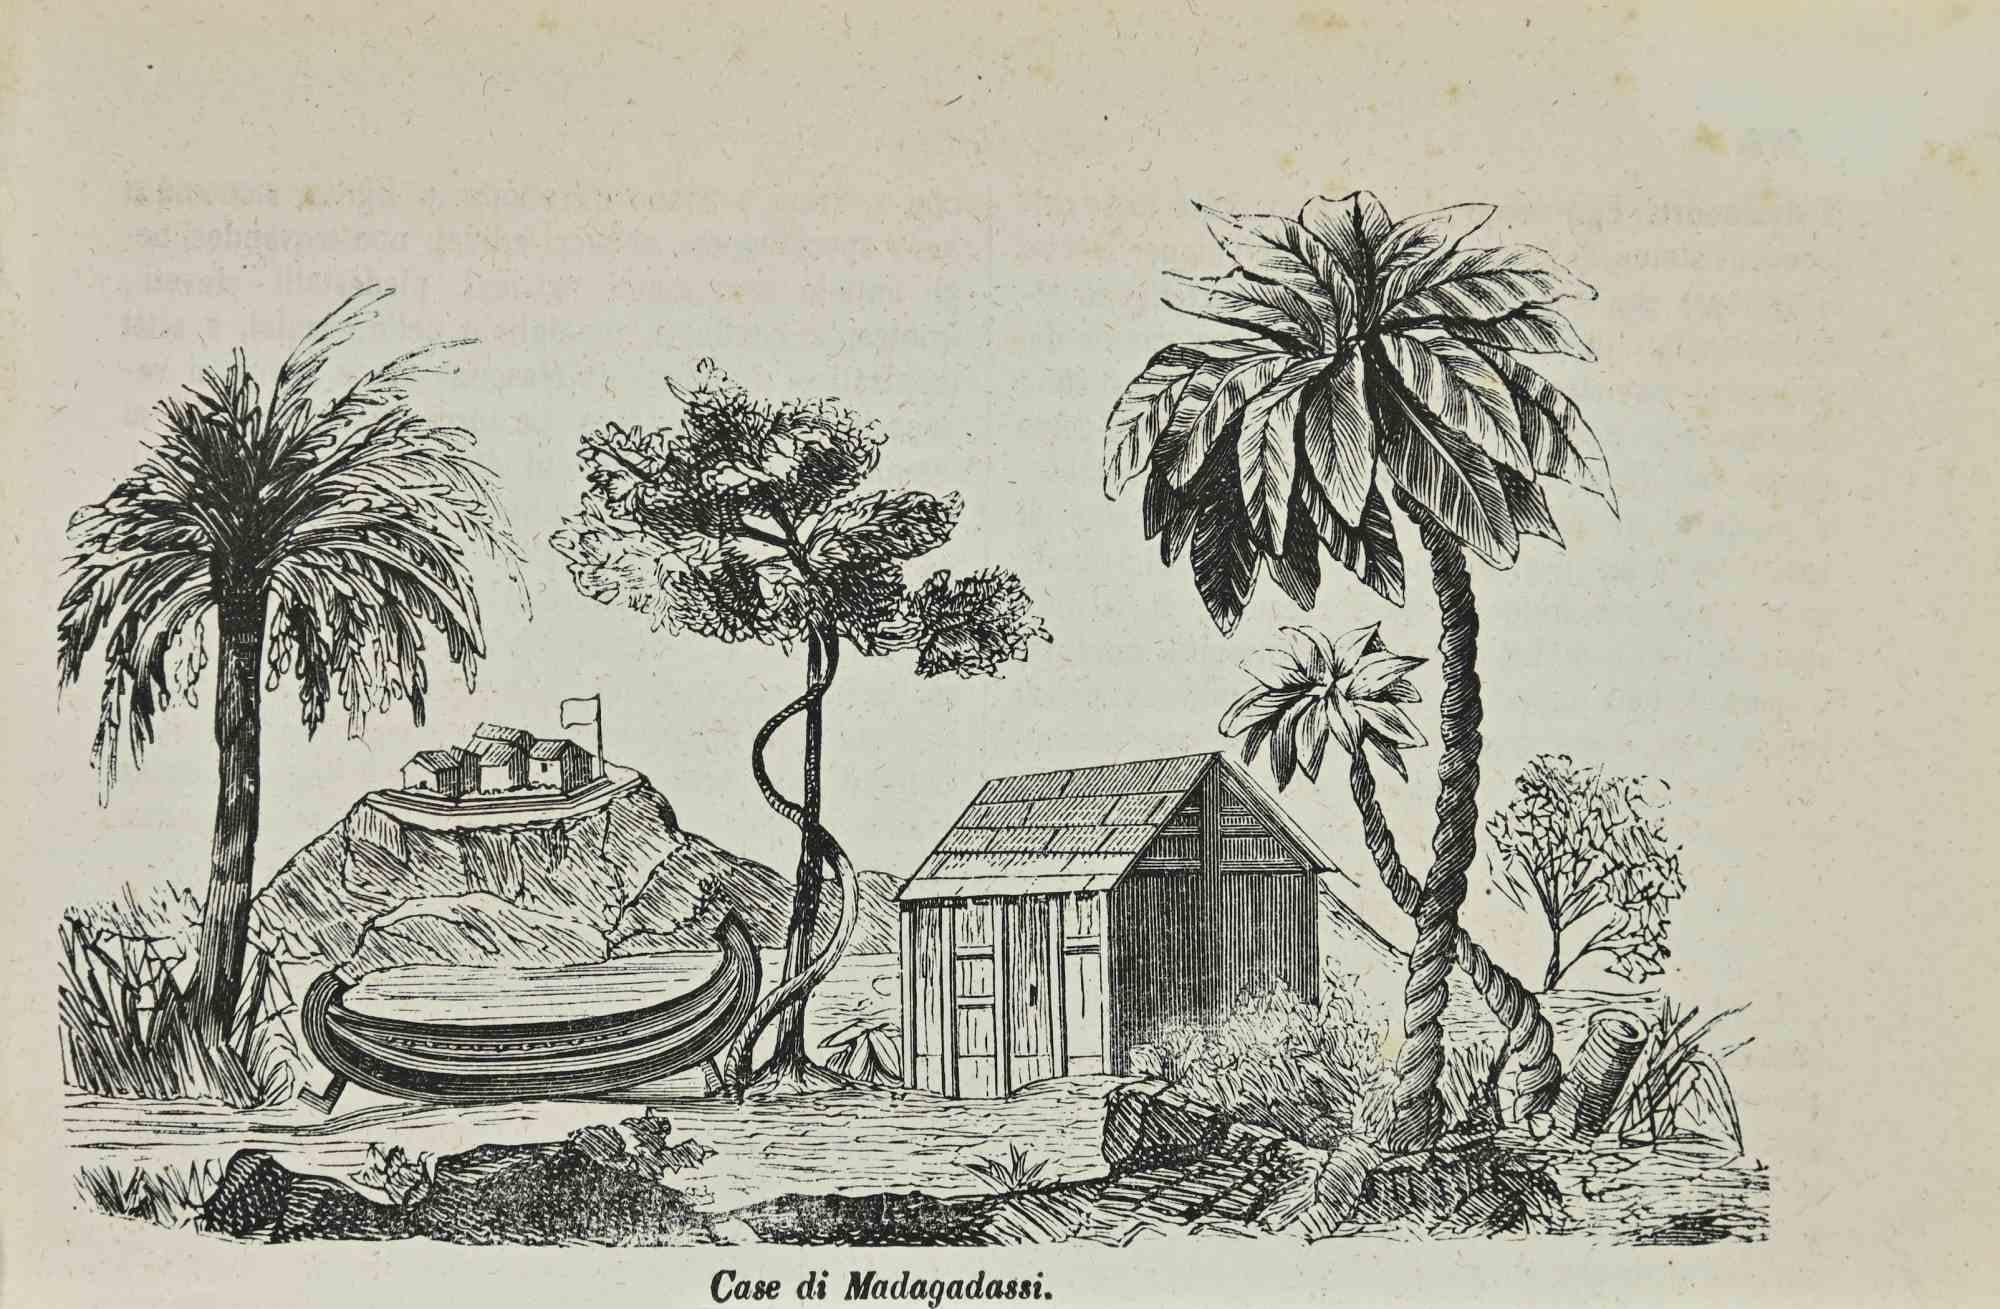 Unknown Figurative Print – Houses of Madagadassi – Lithographie – 1862